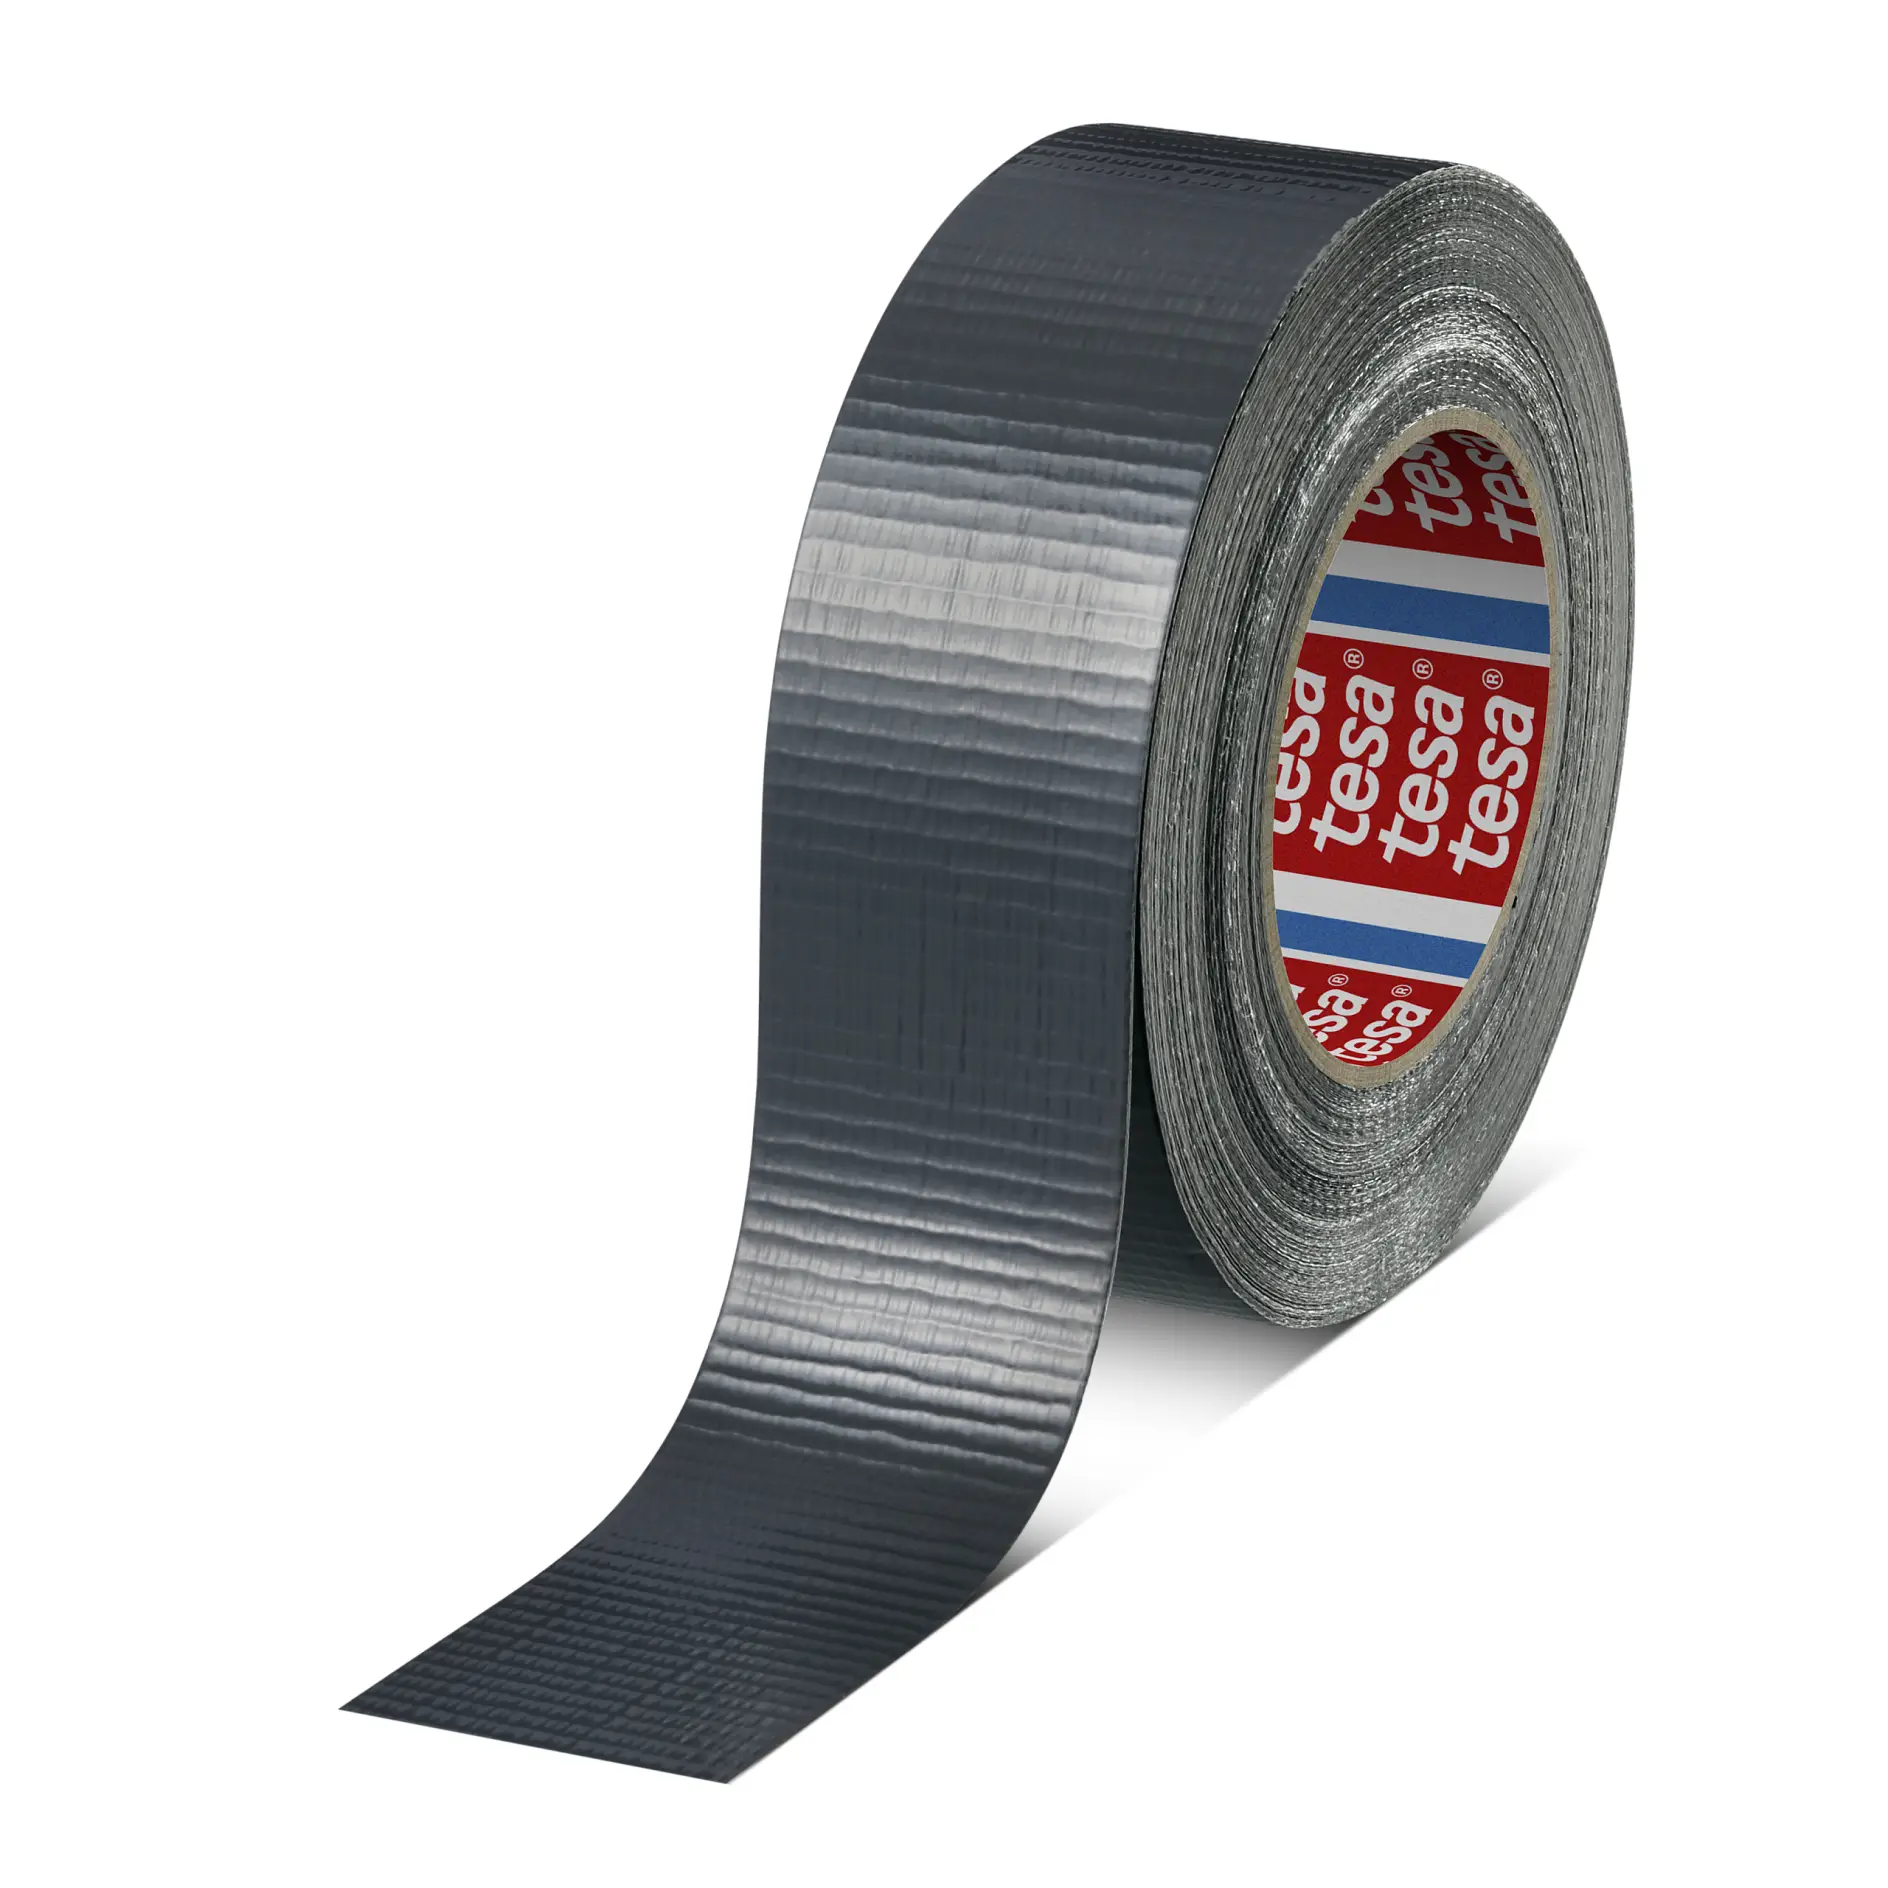 tesa-professional-4662-extra-strong-duct-tape-gray-046620008602-pr